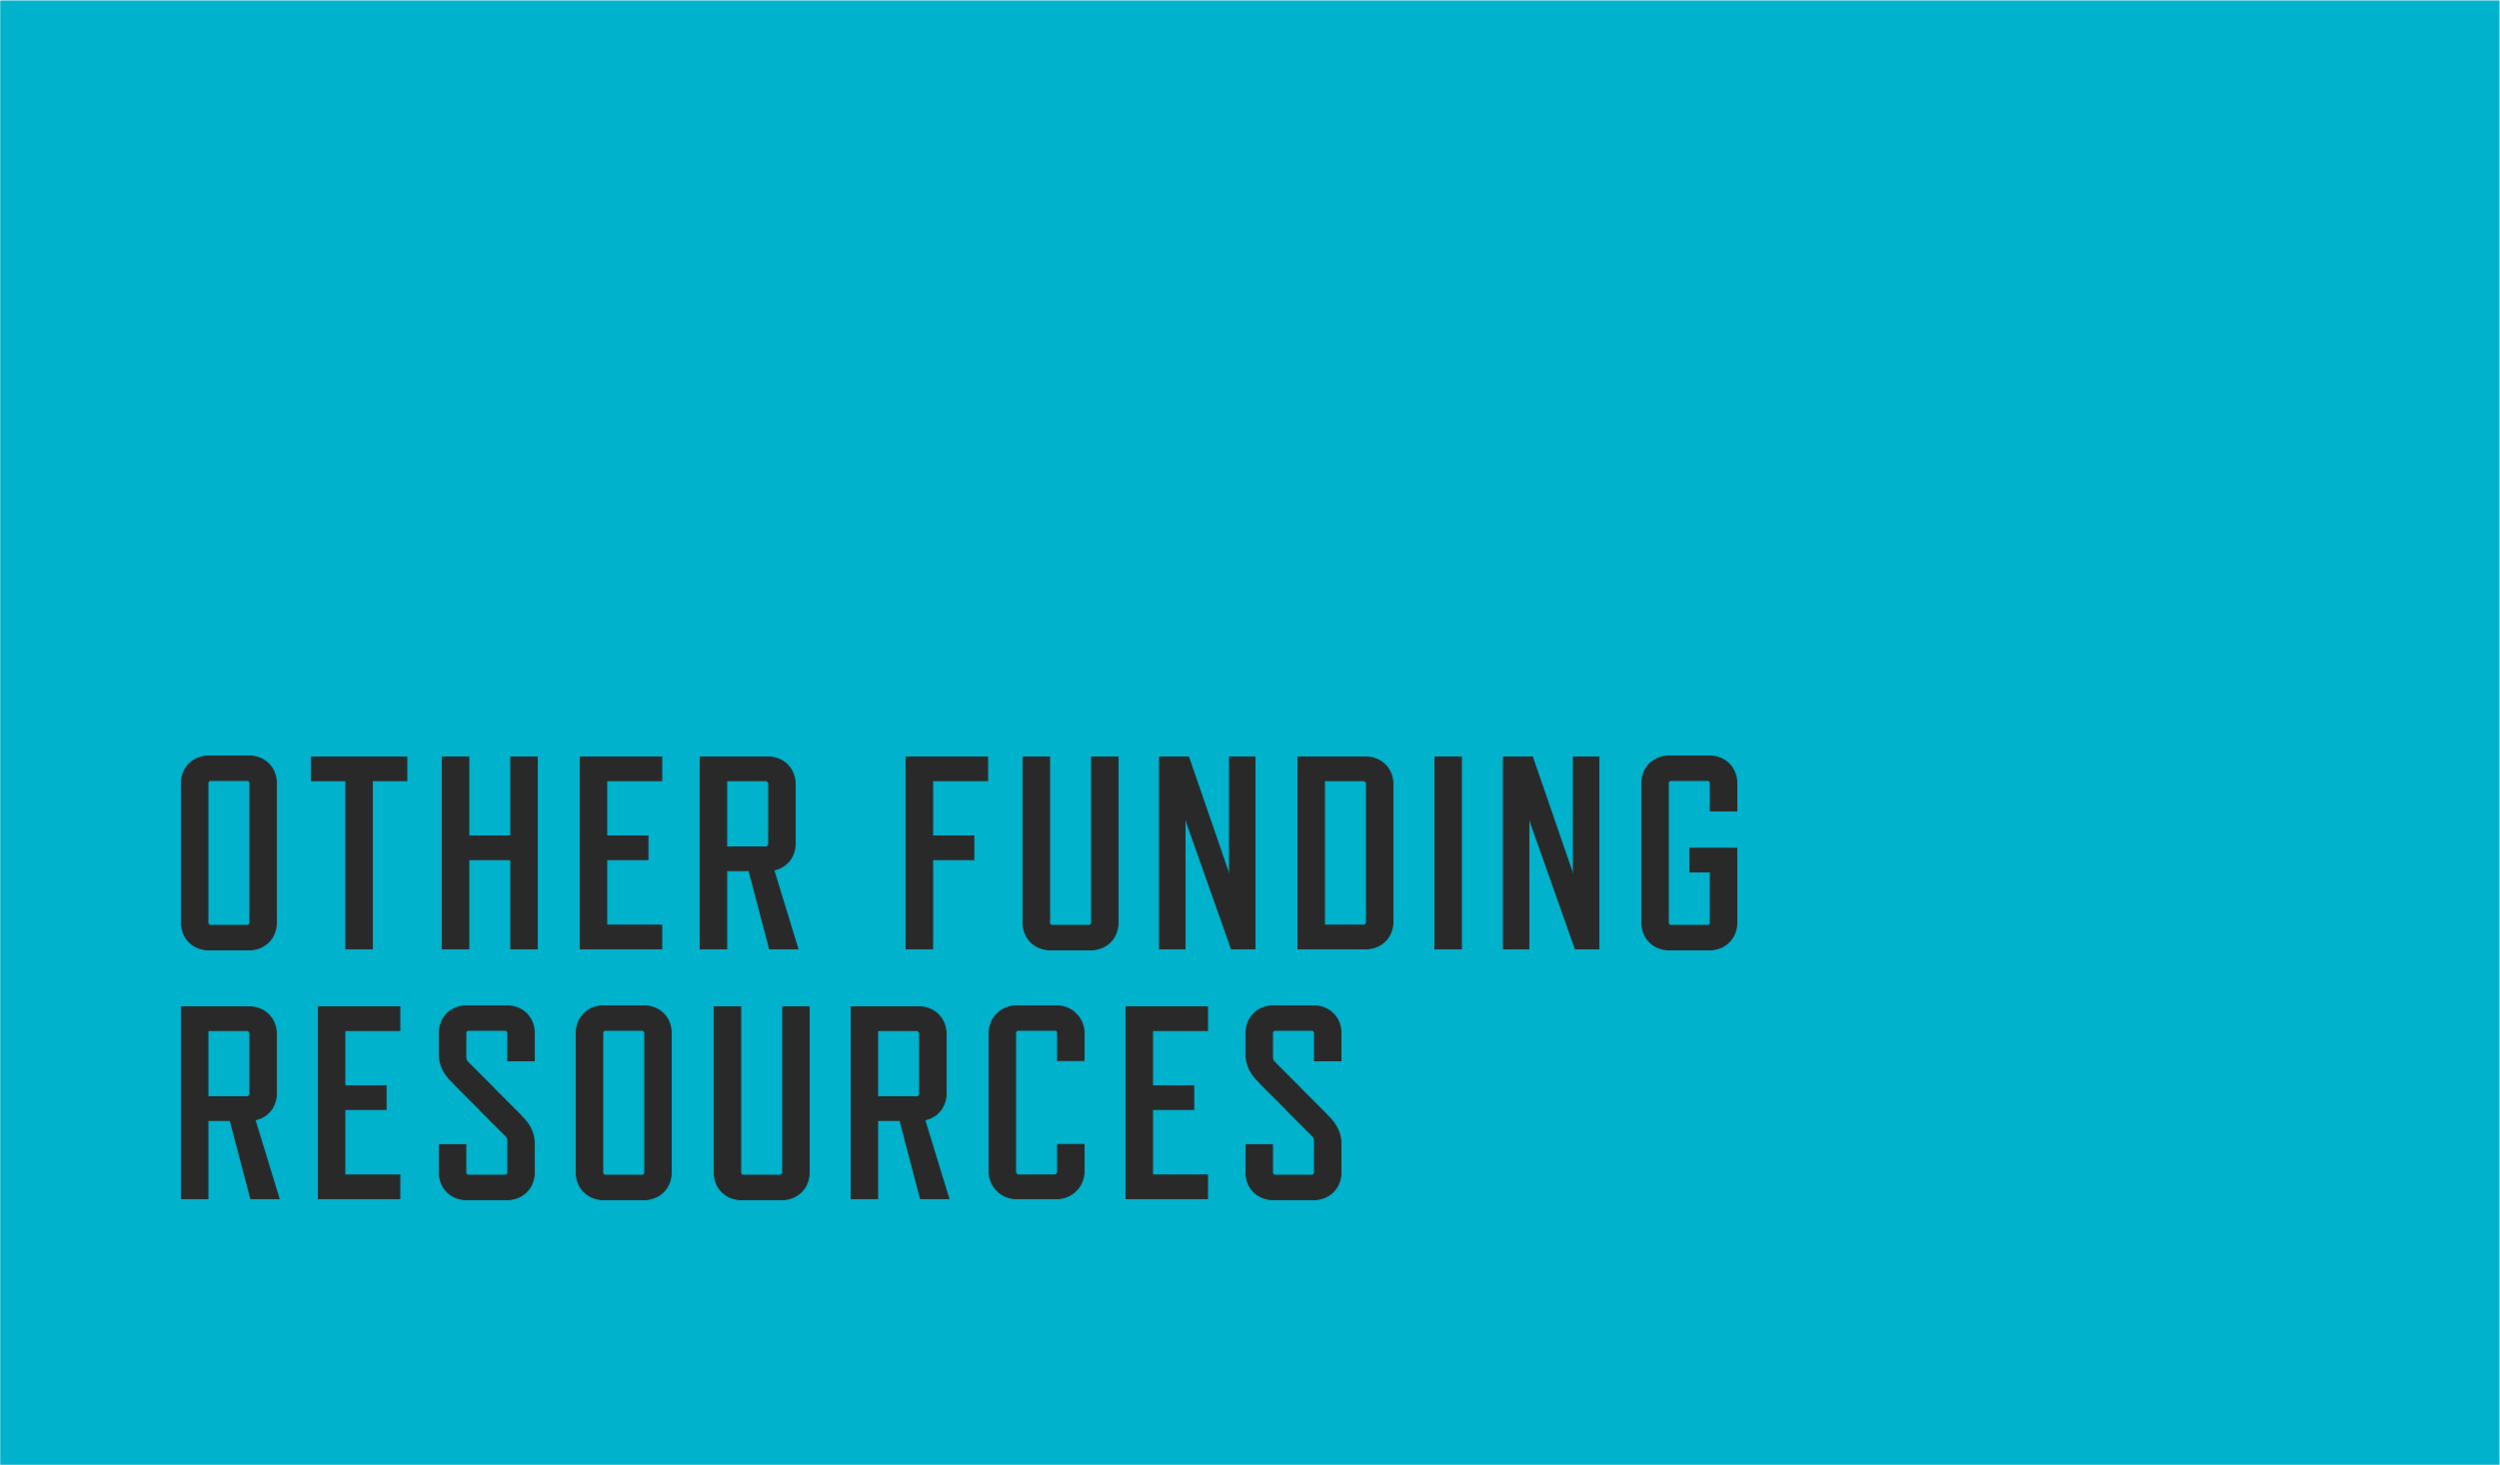 Resources for alternative or additional funding mechanisms for businesses beyond those of NextCycle Michigan including grants, lending, venture capital, and other funding resources.